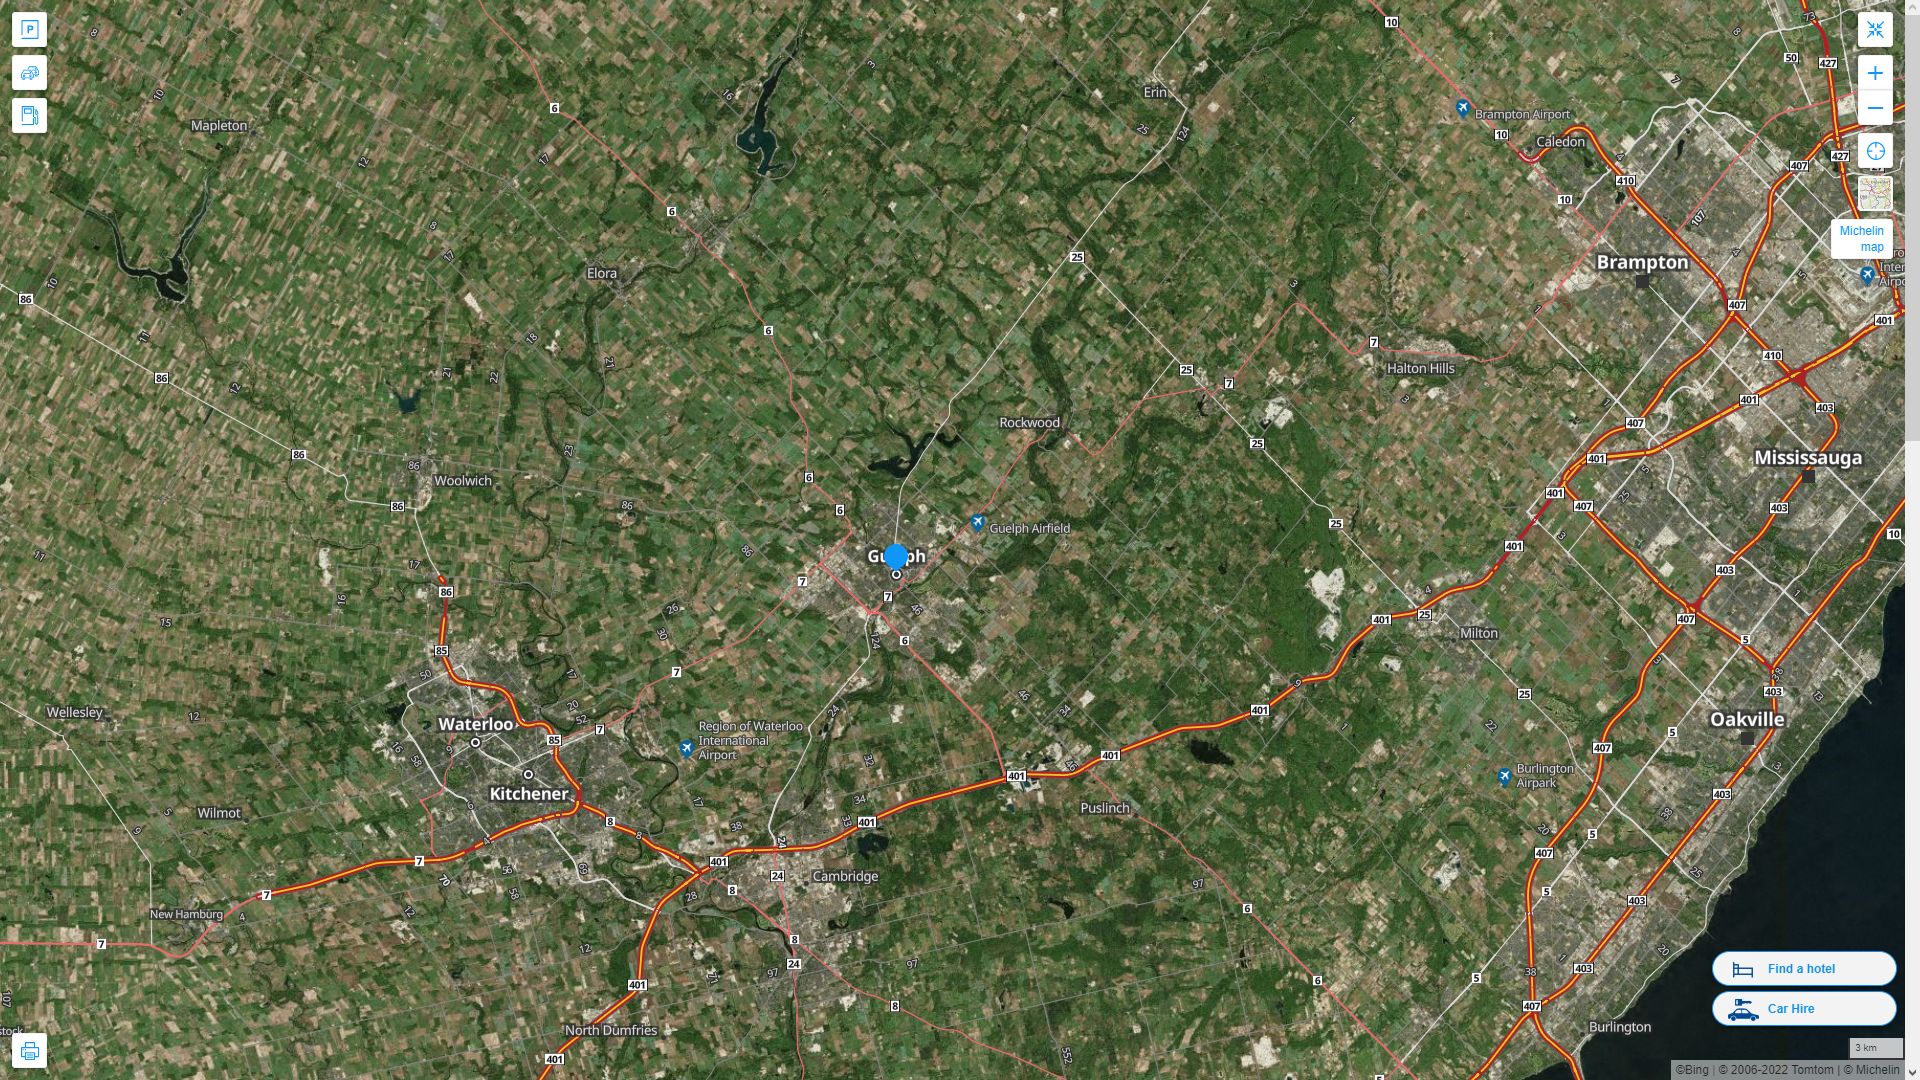 Guelph Highway and Road Map with Satellite View